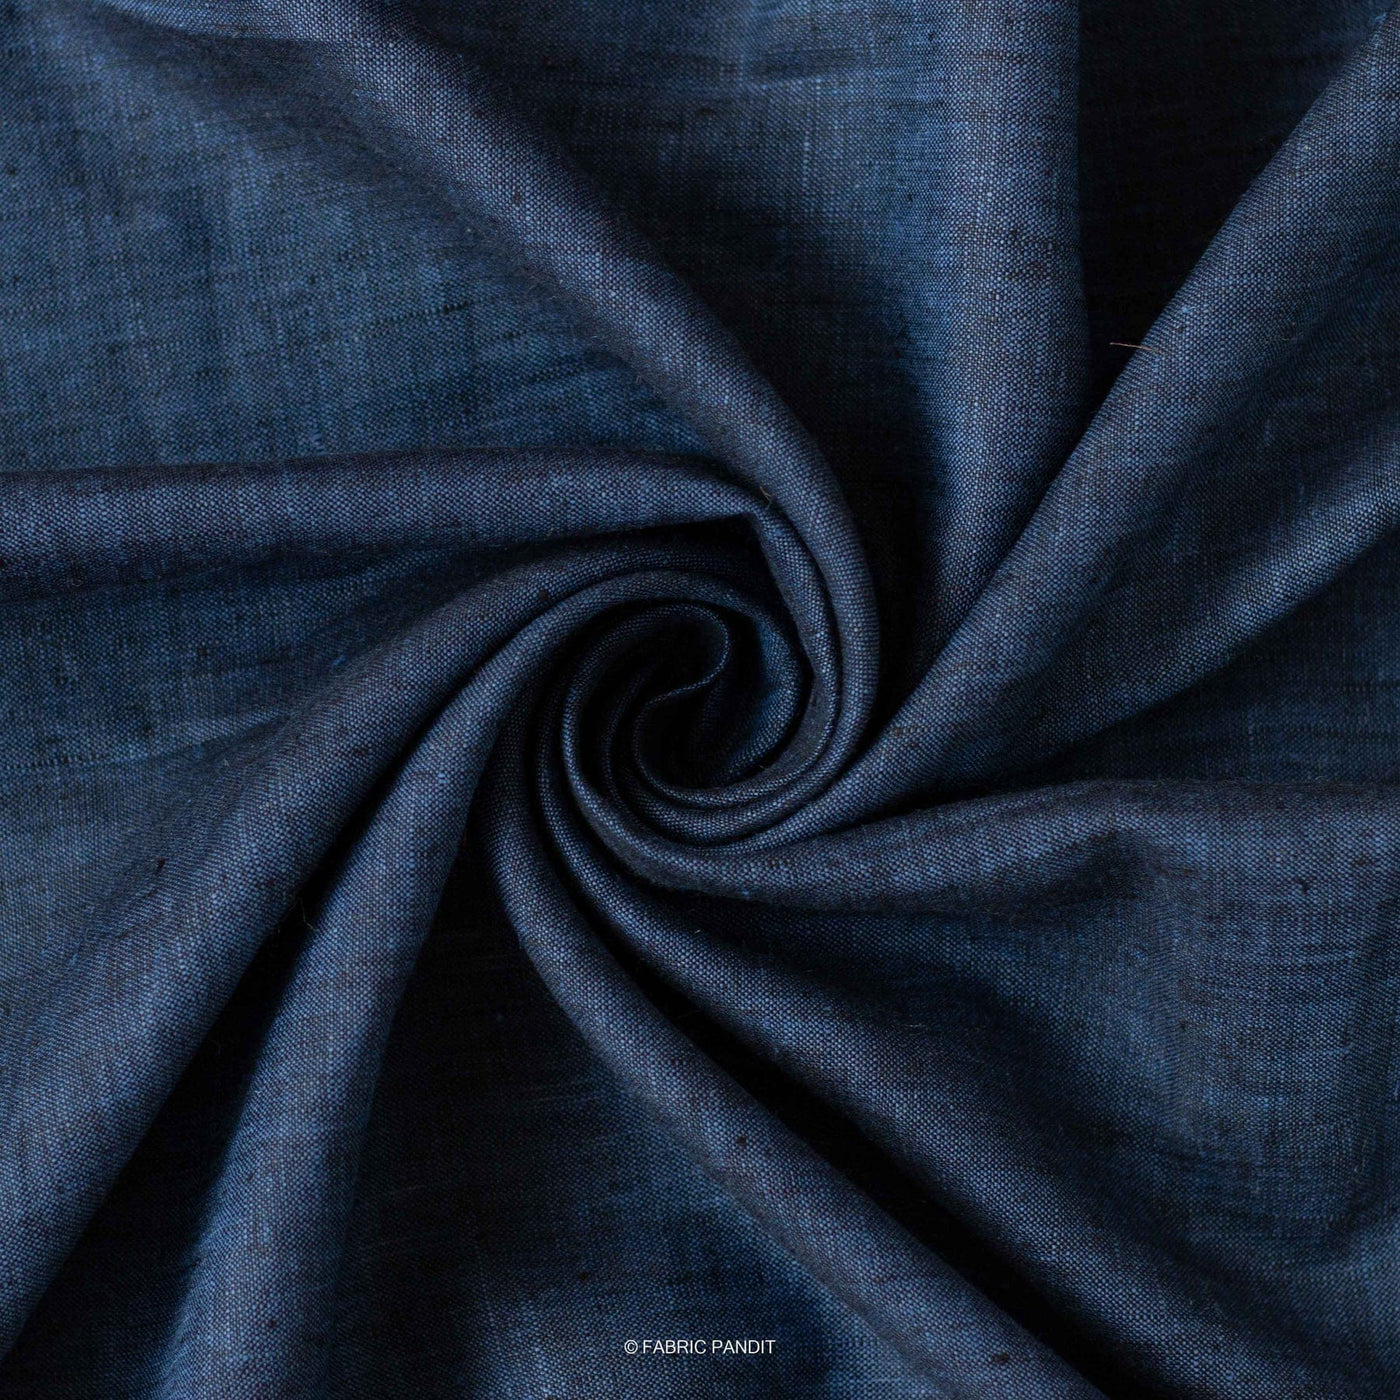 Fabric Pandit Fabric Dark Blue Color Plain Yarn Dyed 60 Lea Pure Linen Fabric (58 Inches)